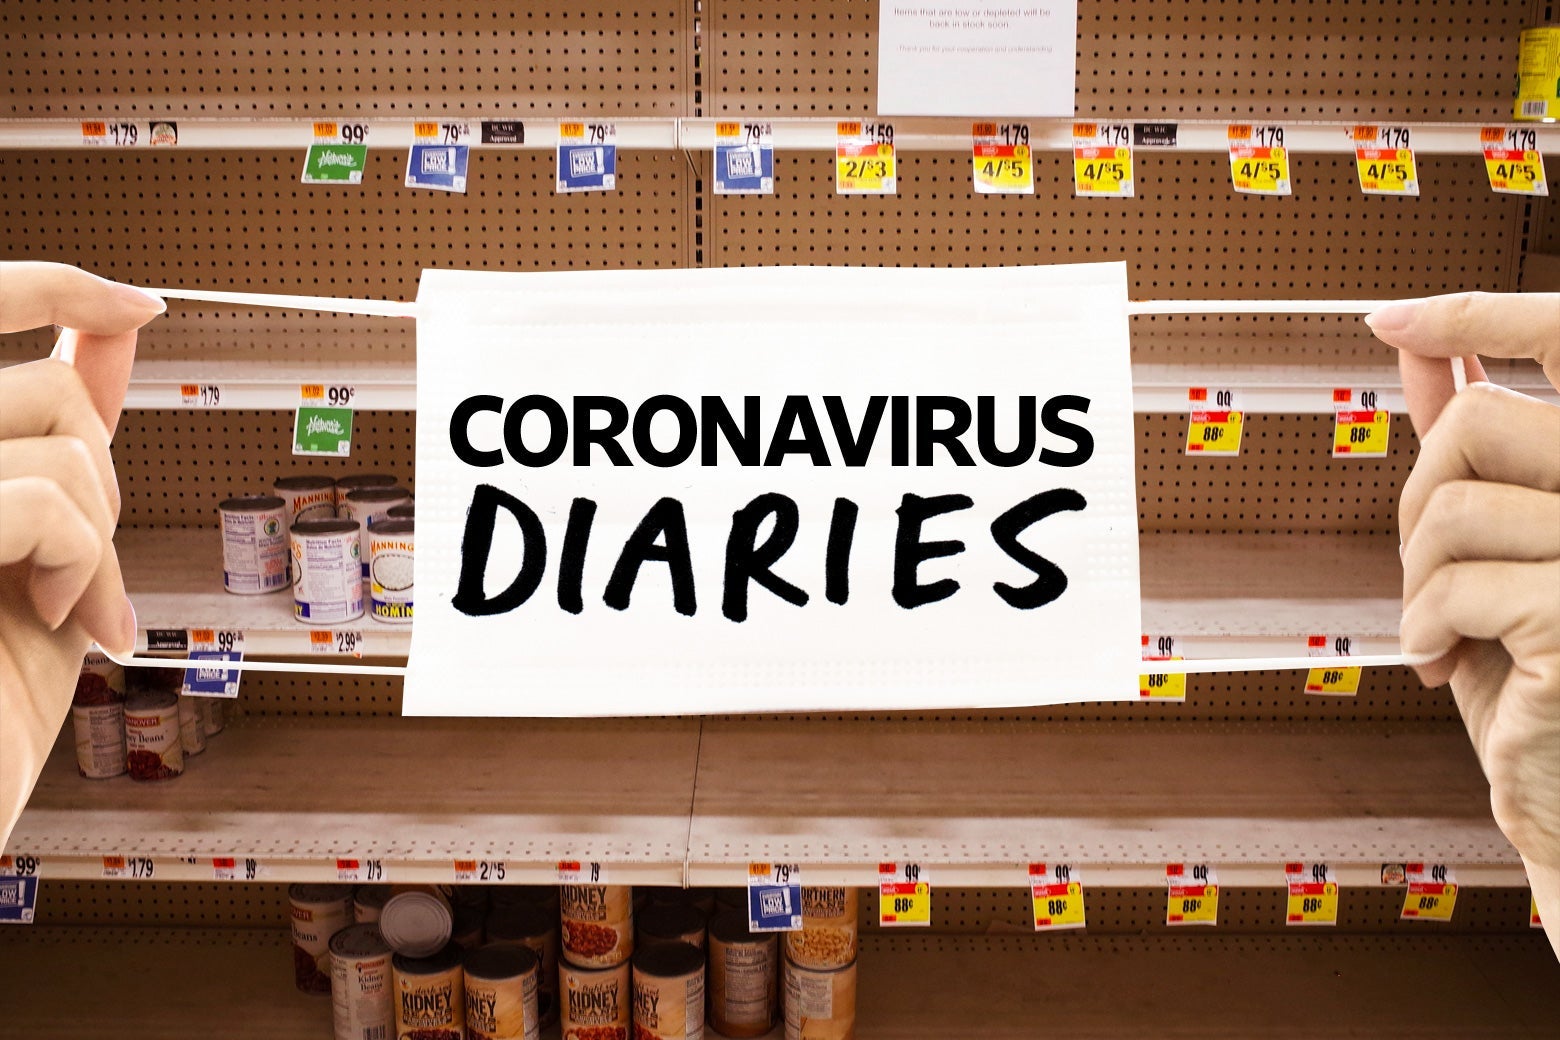 Near empty shelves for canned goods are seen in a supermarket in Washington, DC on March 20, 2020 with a photo illustrated coronavirus mask over the image of the shelves. 